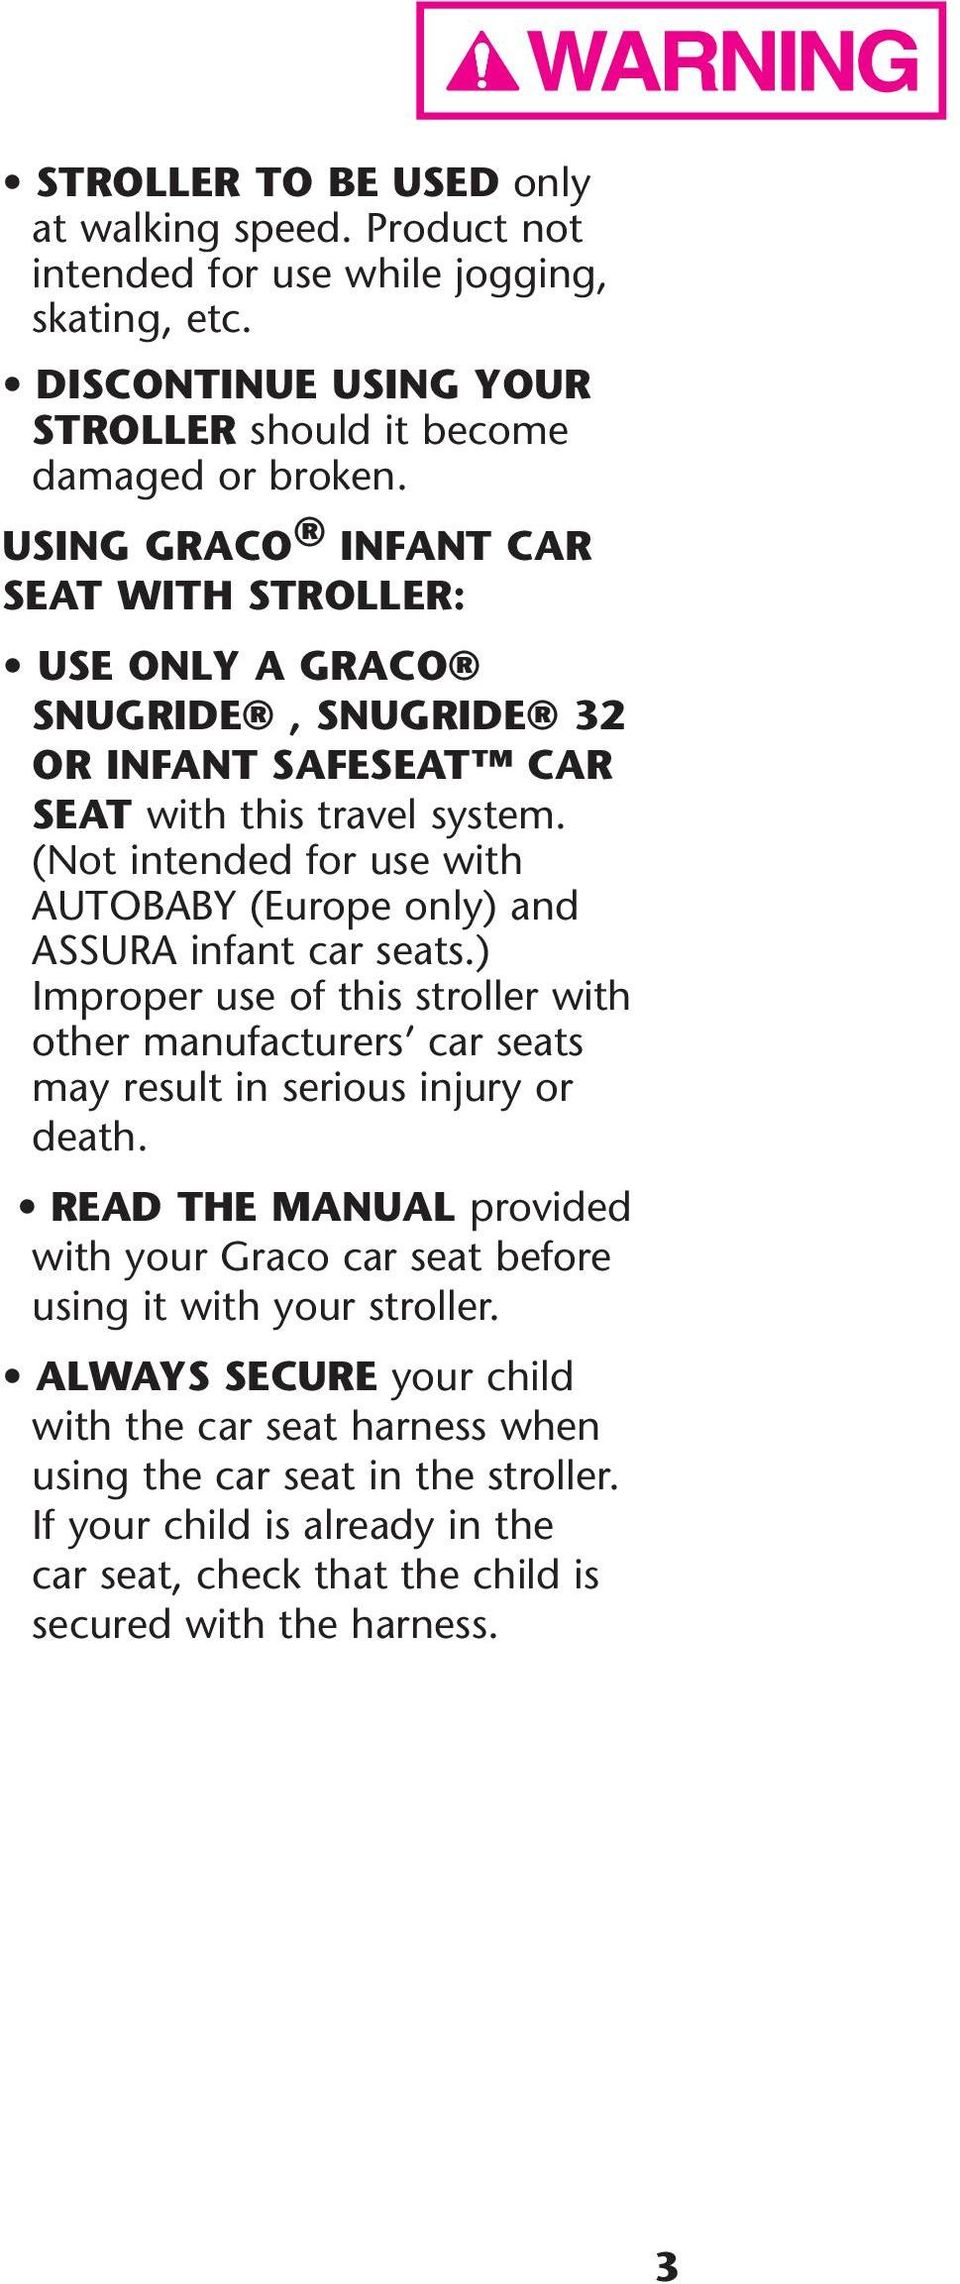 (Not intended for use with AUTOBABY (Europe only) and ASSURA infant car seats.) Improper use of this stroller with other manufacturers car seats may result in serious injury or death.